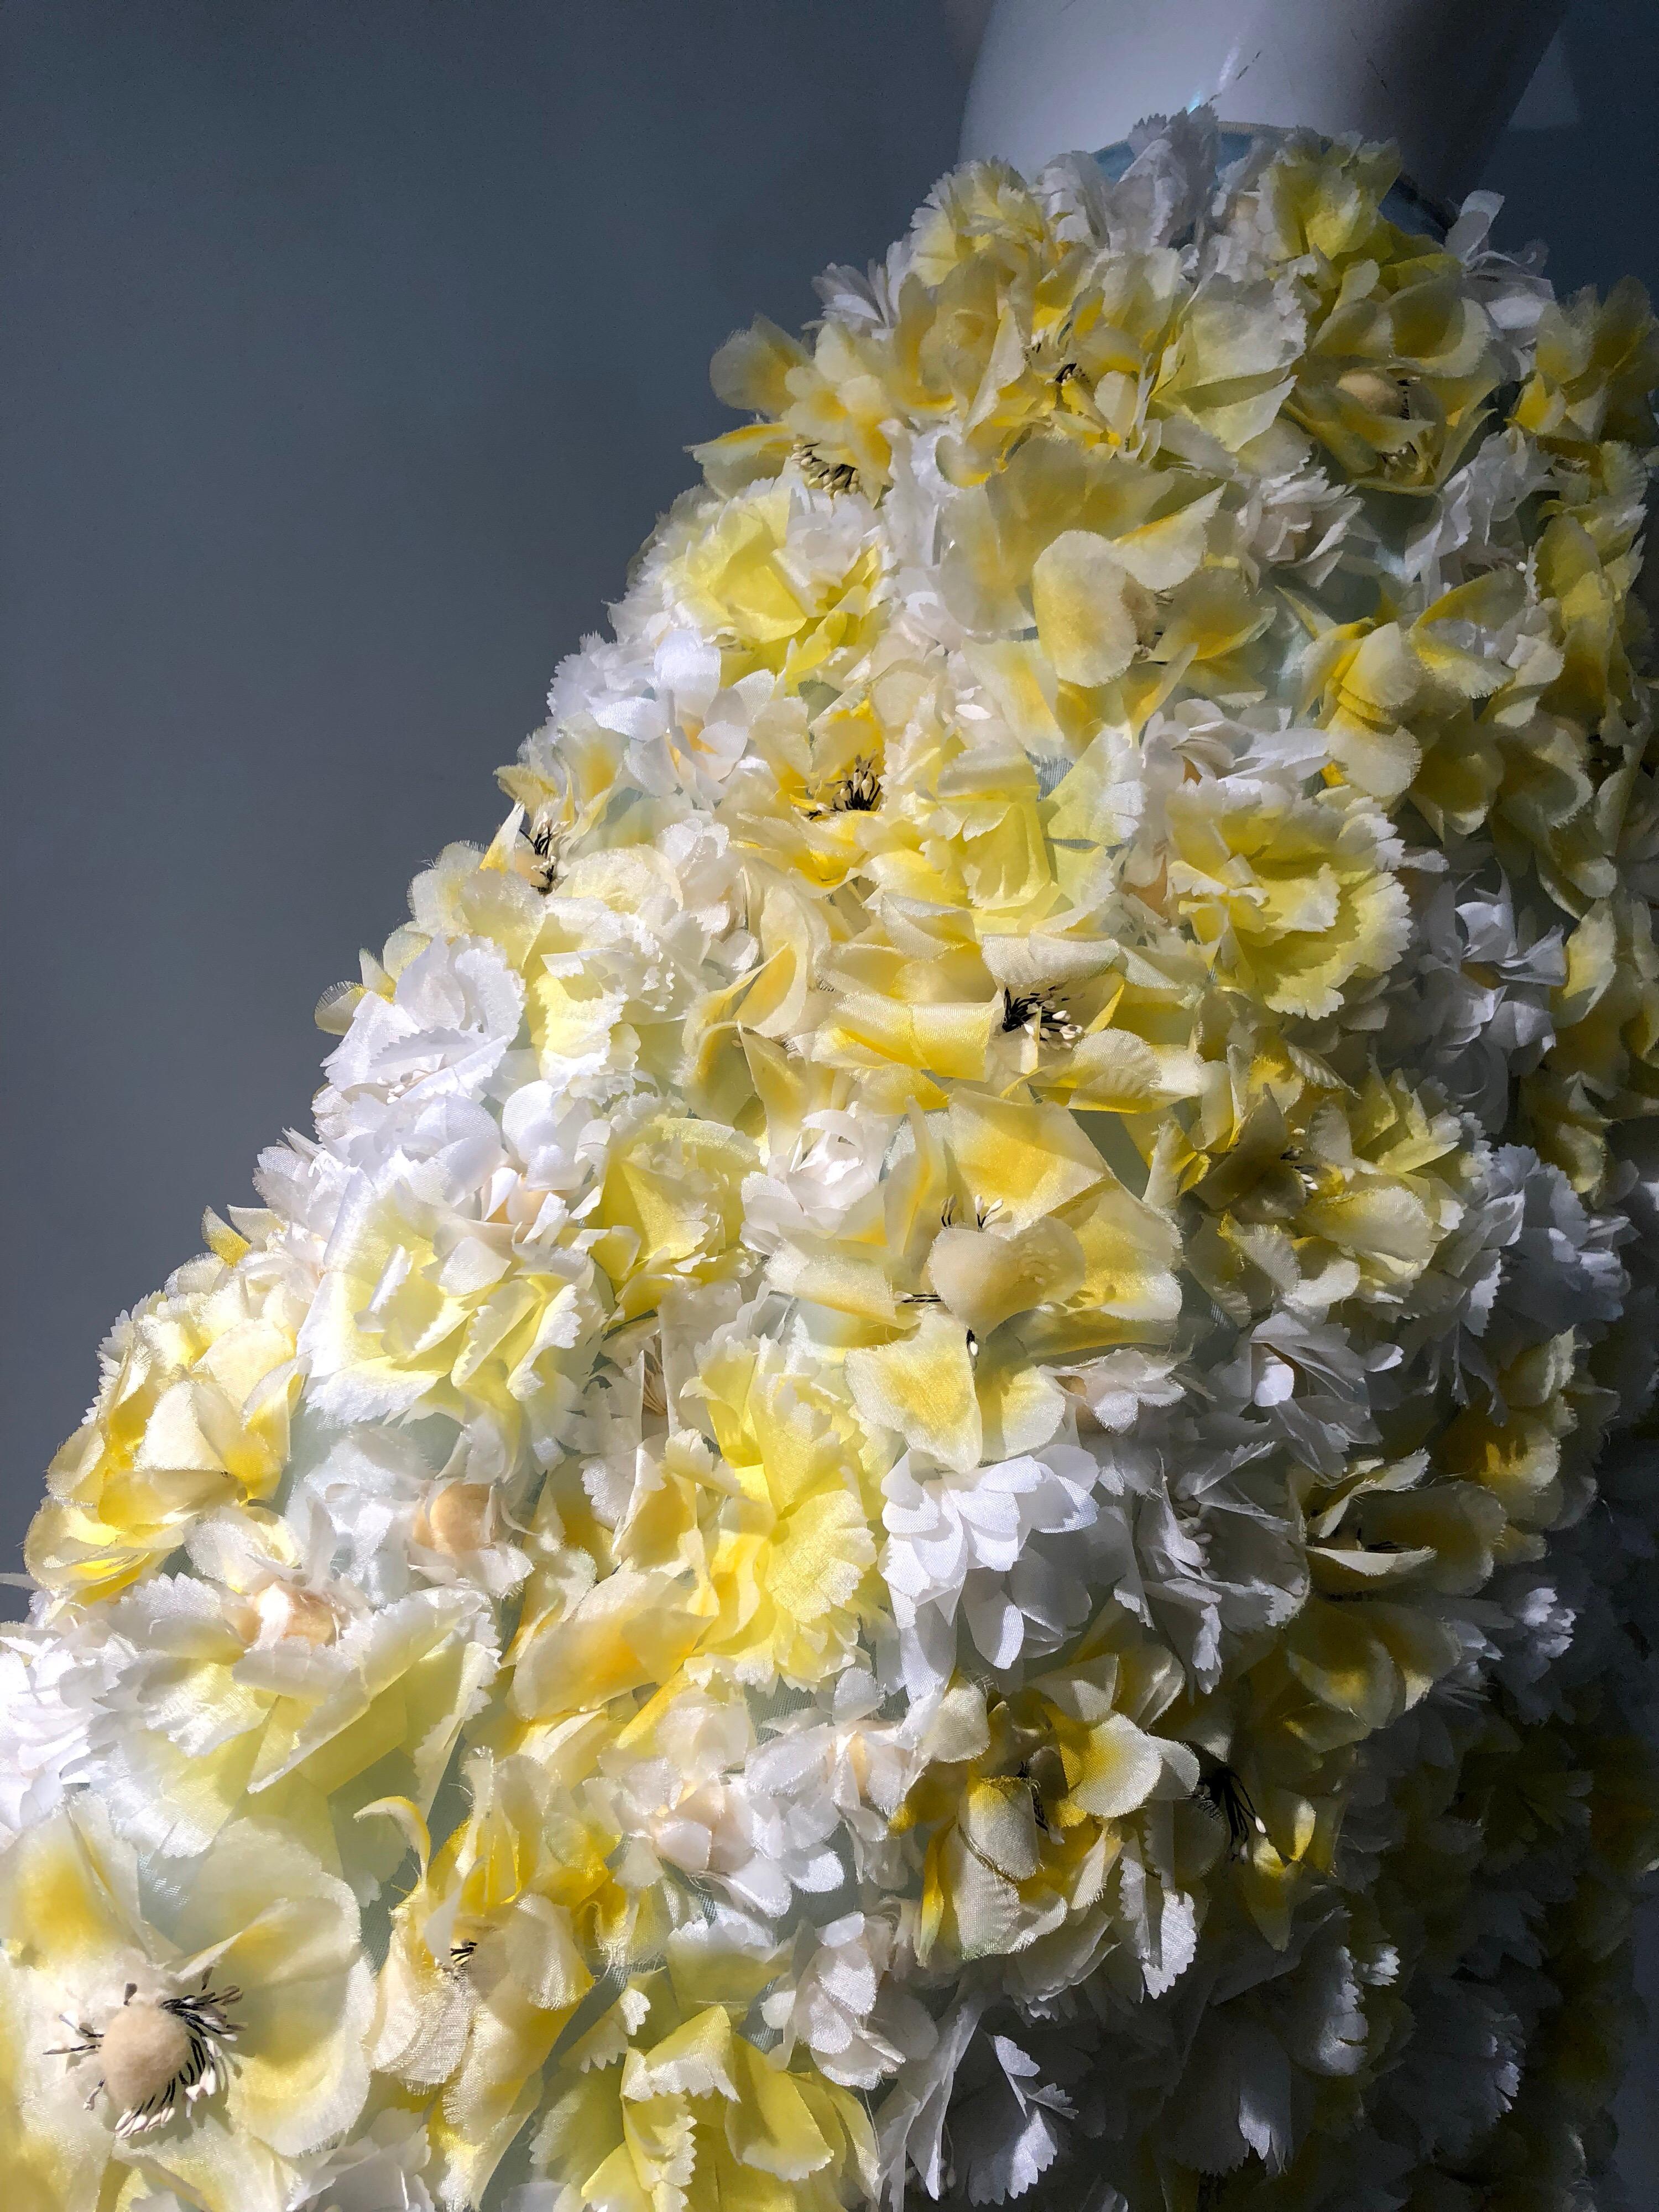 1960s Adolpho Floral Fantasy Ball Skirt In Yellow & White Silk Flowers 5